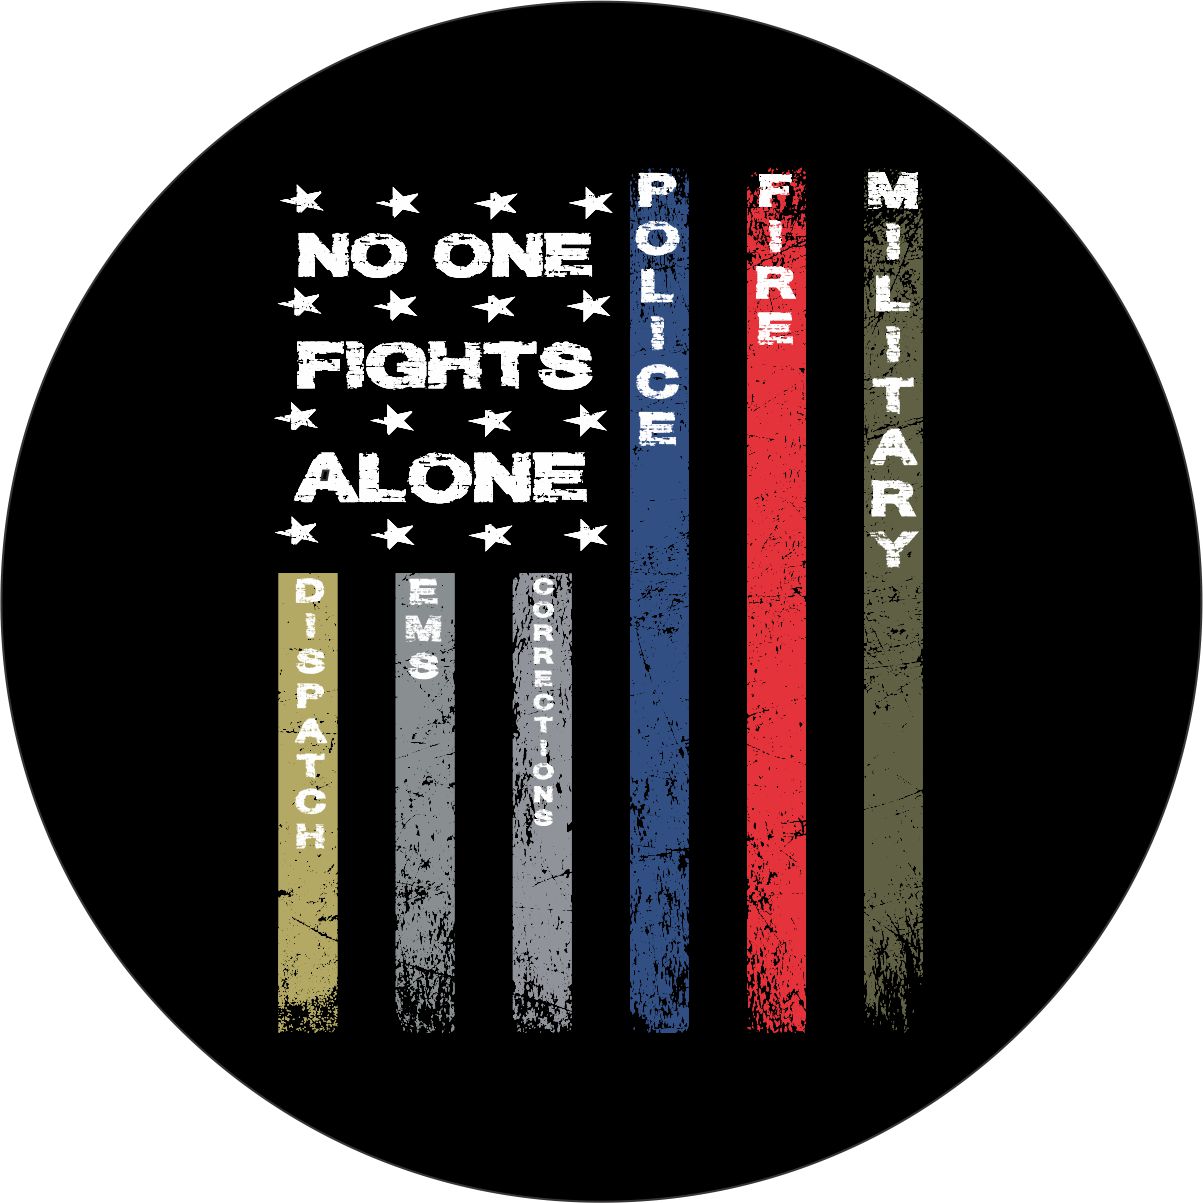 Spare tire cover design that displays the American flag and symbolism of the support for our first responders including police, fire department, military, dispatch, EMS, and corrections, military and says no one fights alone